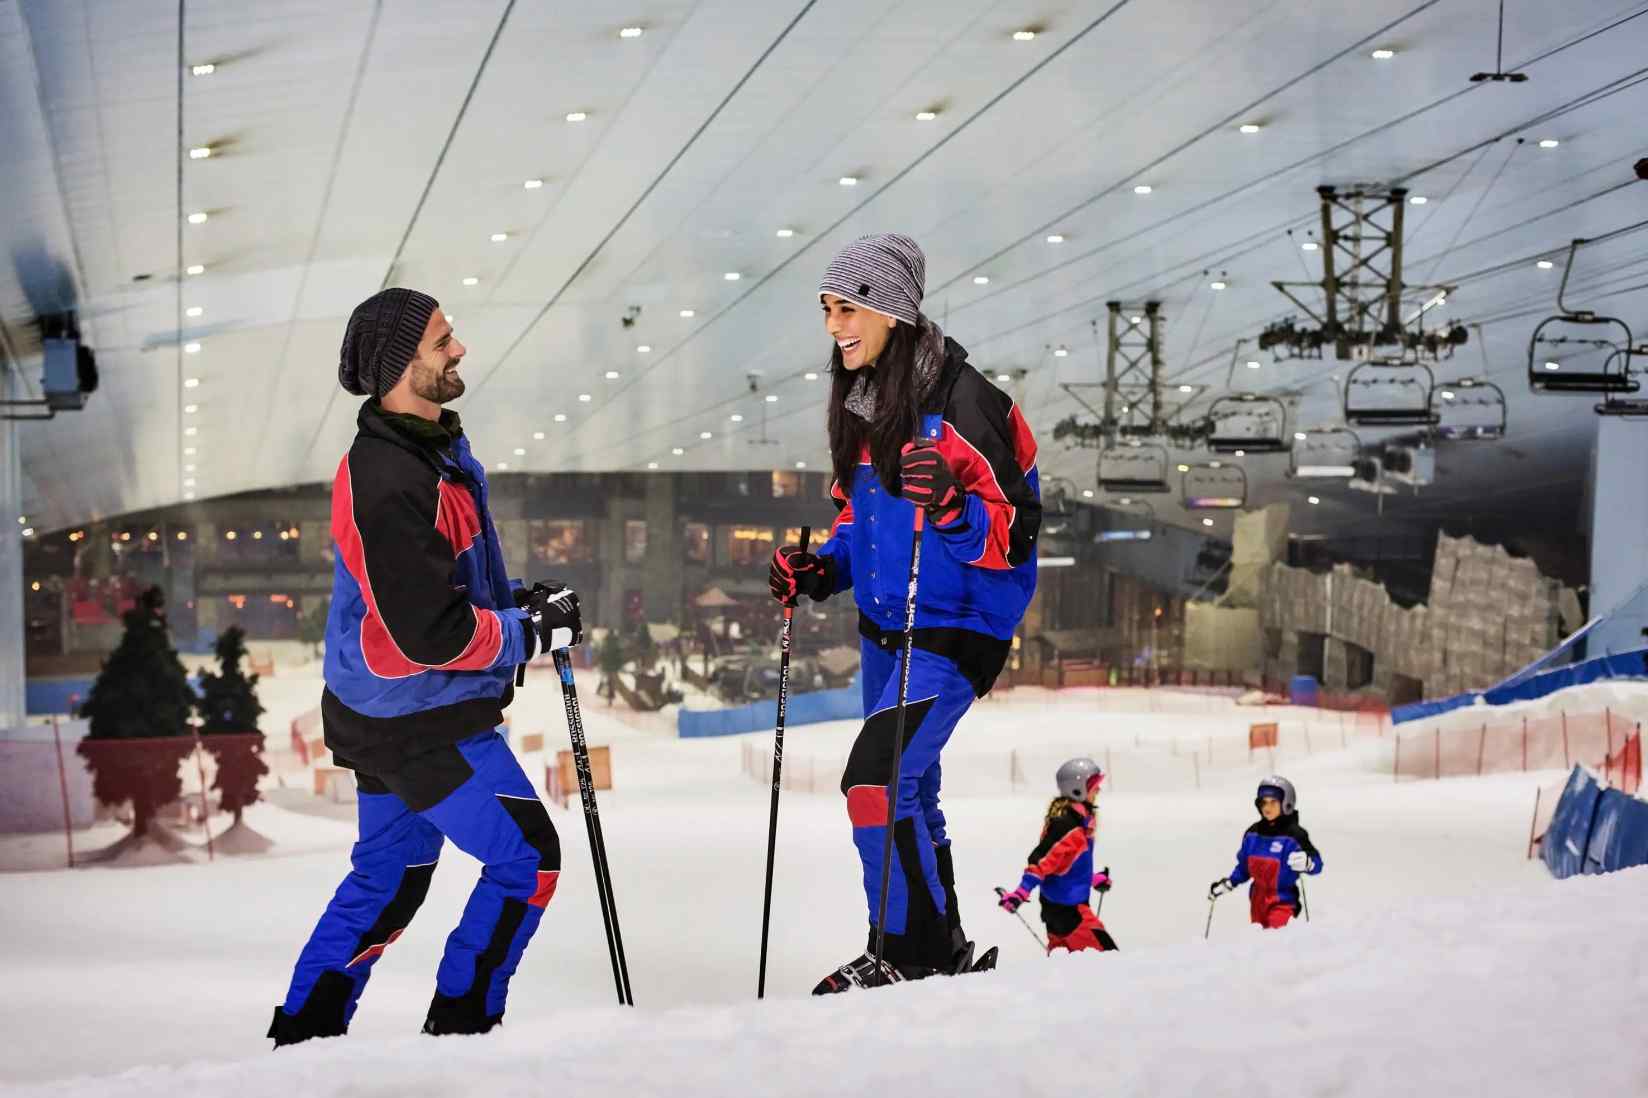 Snow World Emirates Mall in Dubai is a highly demanding place.